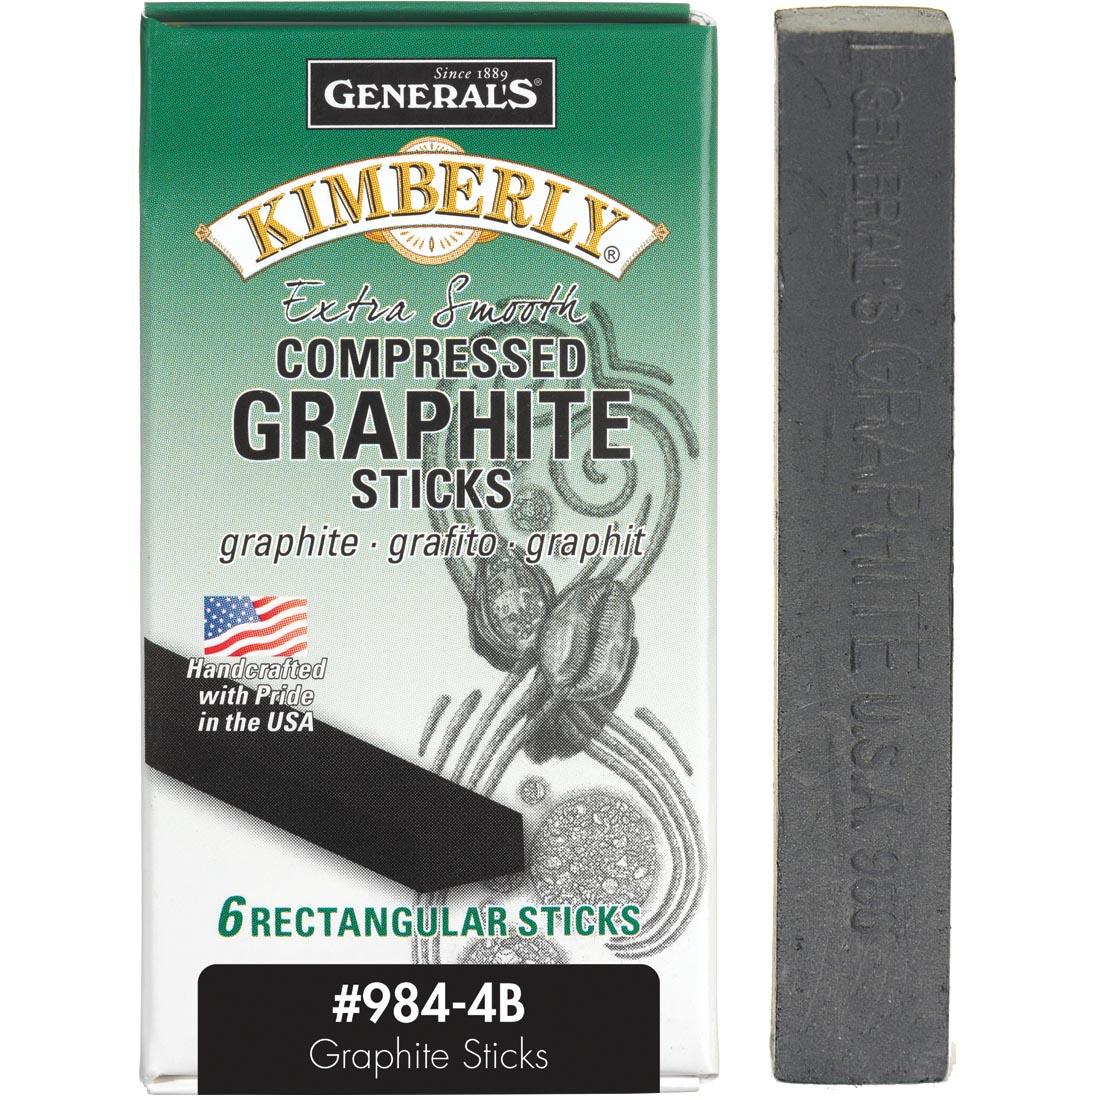 General's Kimberly Compressed Graphite Sticks 4B 6-Count Package with a single one shown outside the box